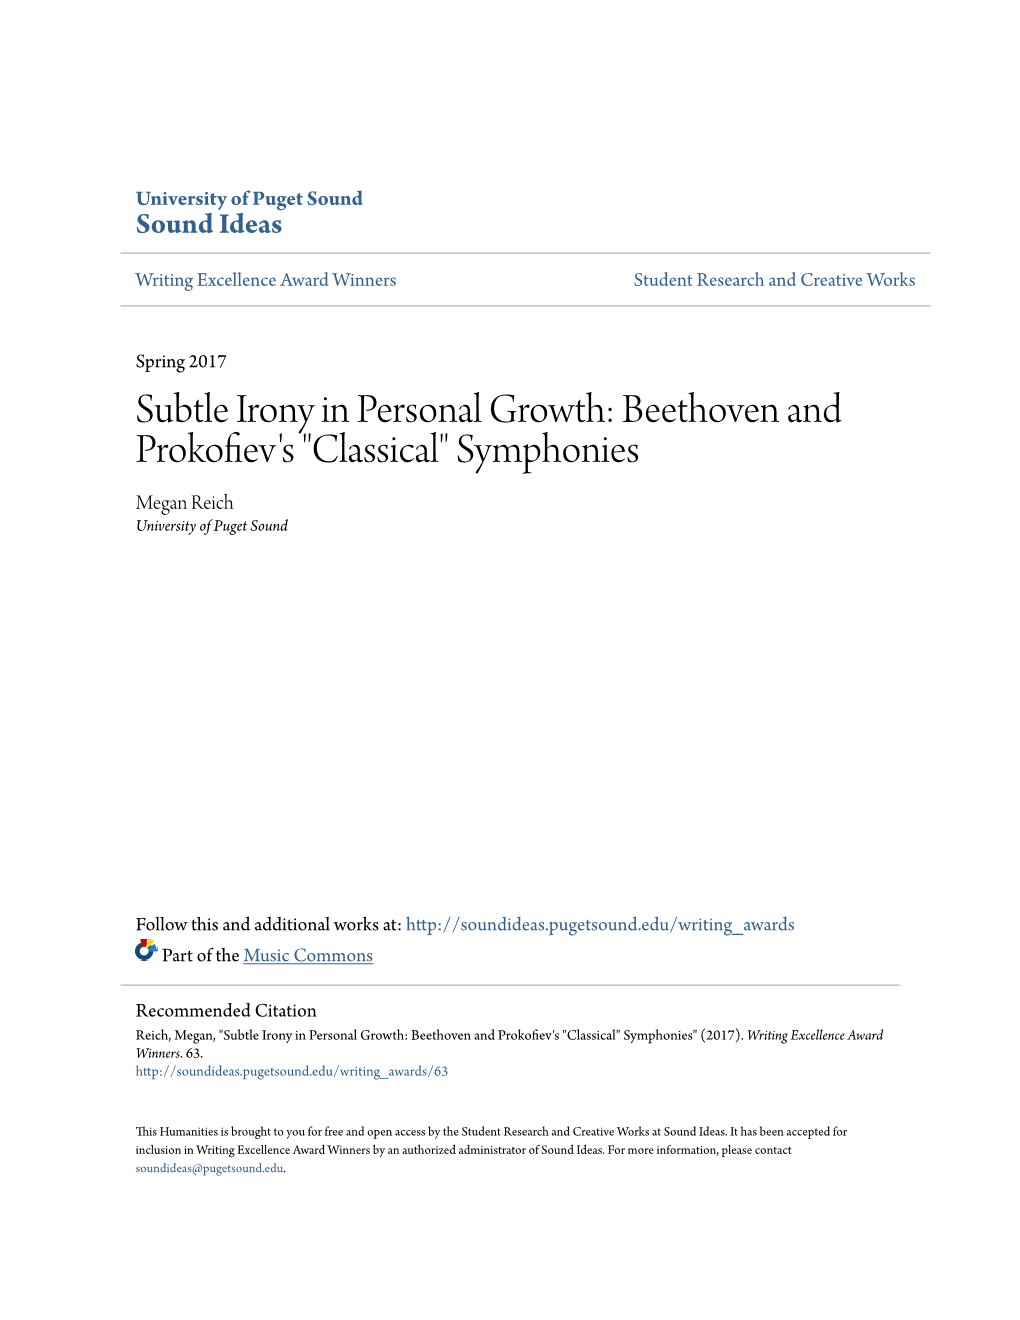 Subtle Irony in Personal Growth: Beethoven and Prokofiev's "Classical" Symphonies Megan Reich University of Puget Sound